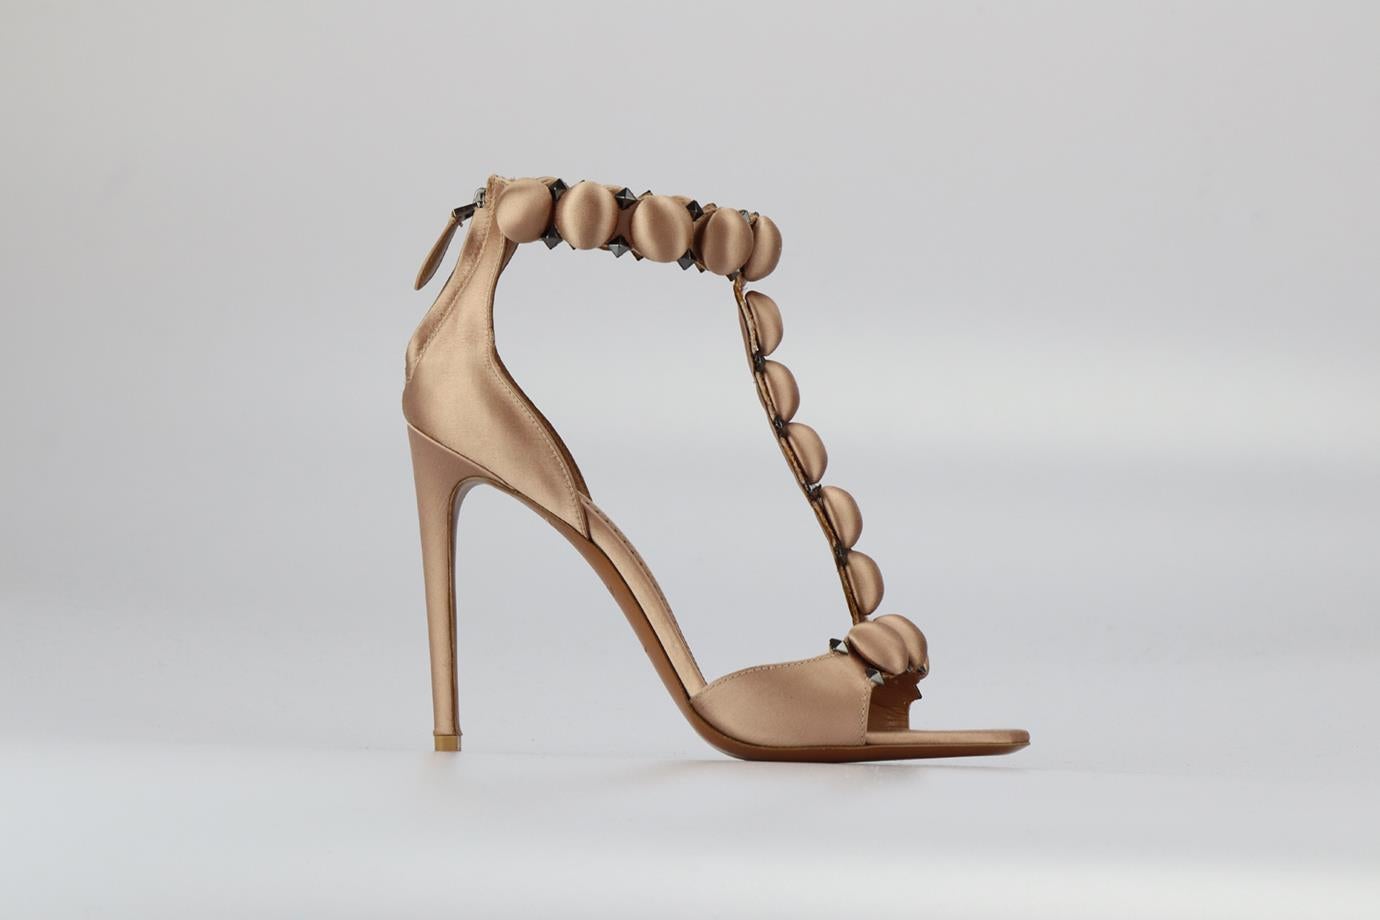 Azzedine Alaïa Bombe Satin Sandals. Pink. Zip fastening - Back. Does not come with - dustbag or box. EU 41 (UK 8, US 11). Insole: 10.3 in. Heel height: 3.5 in. Platform: 0.2 in. Condition: New without box.